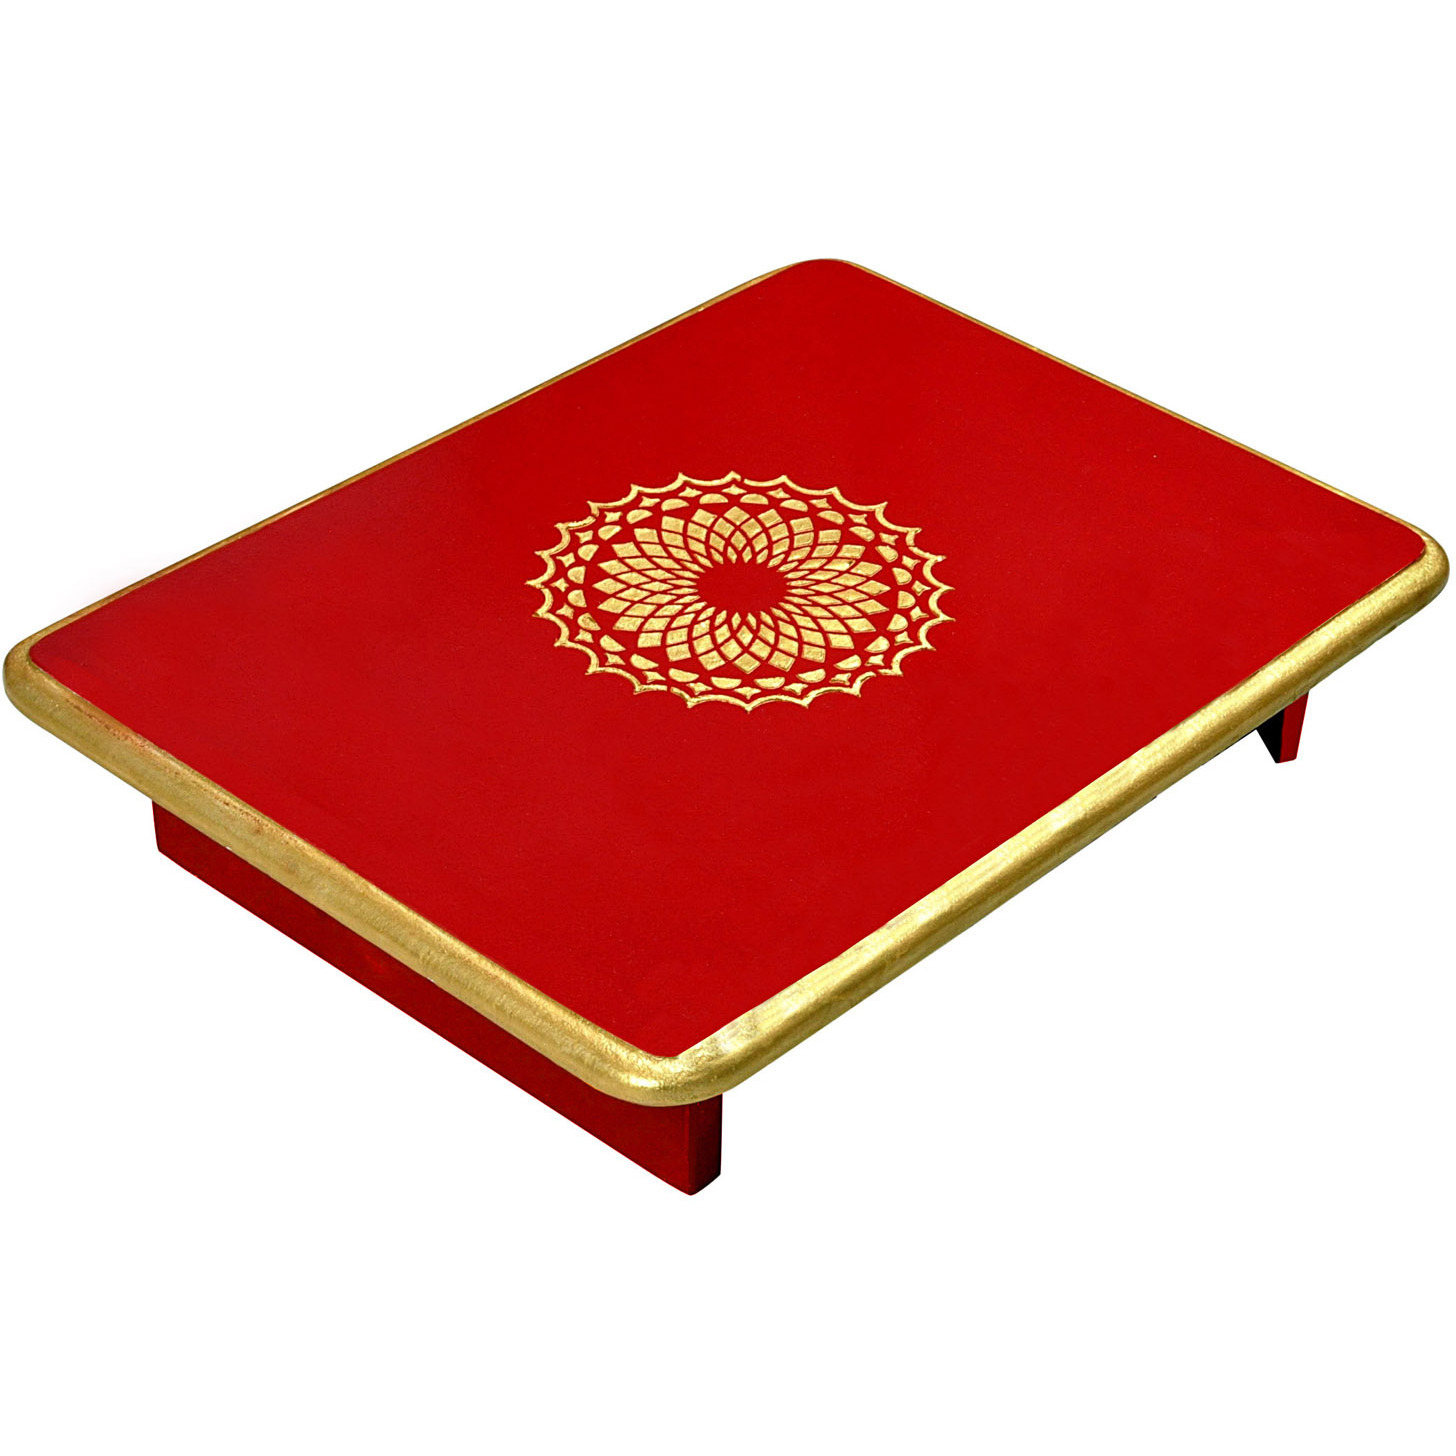 Handmade Wooden Red Temple D??cor Diwali Navratri Puja Chowki End Table (Color: Red, Size: 24X15X4)